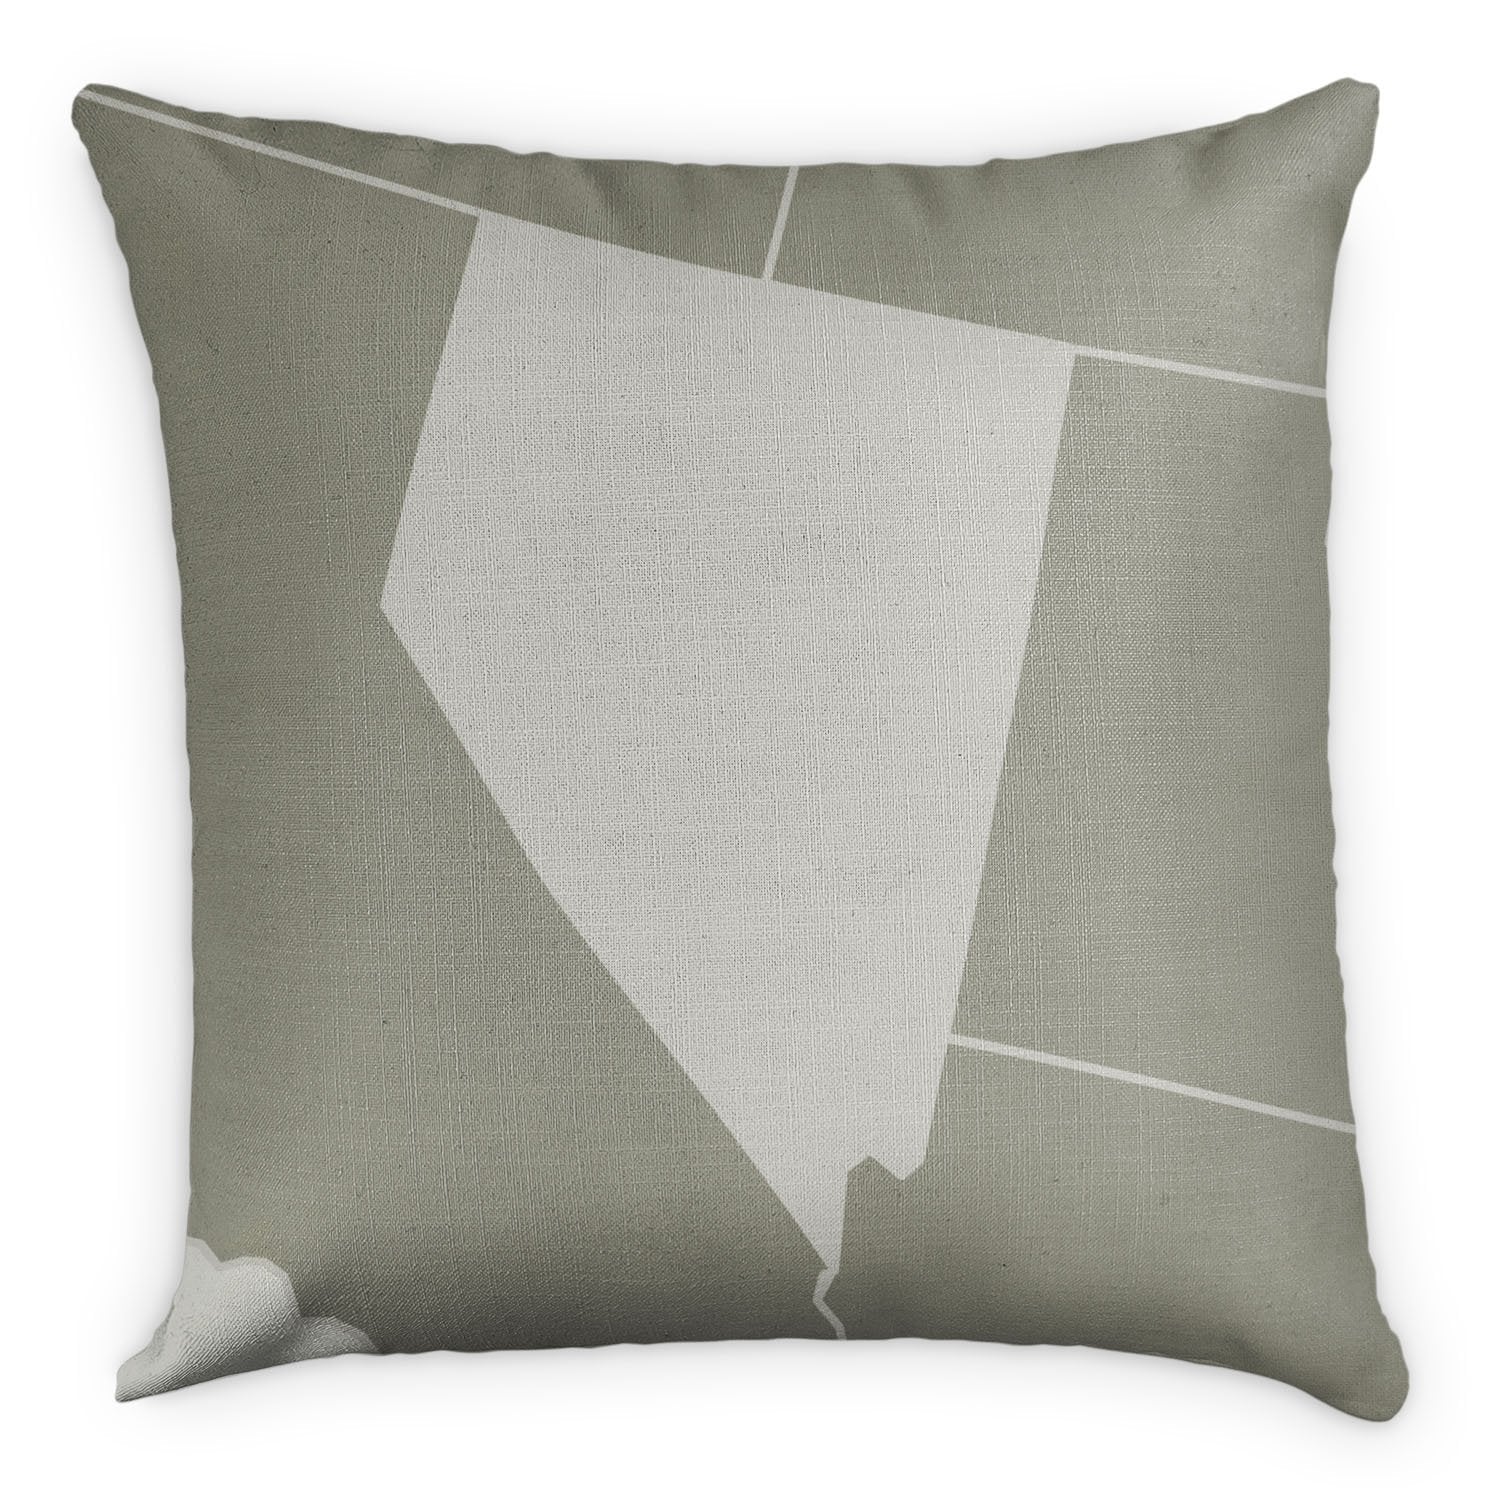 Nevada Square Pillow - Linen -  - Knotty Tie Co.